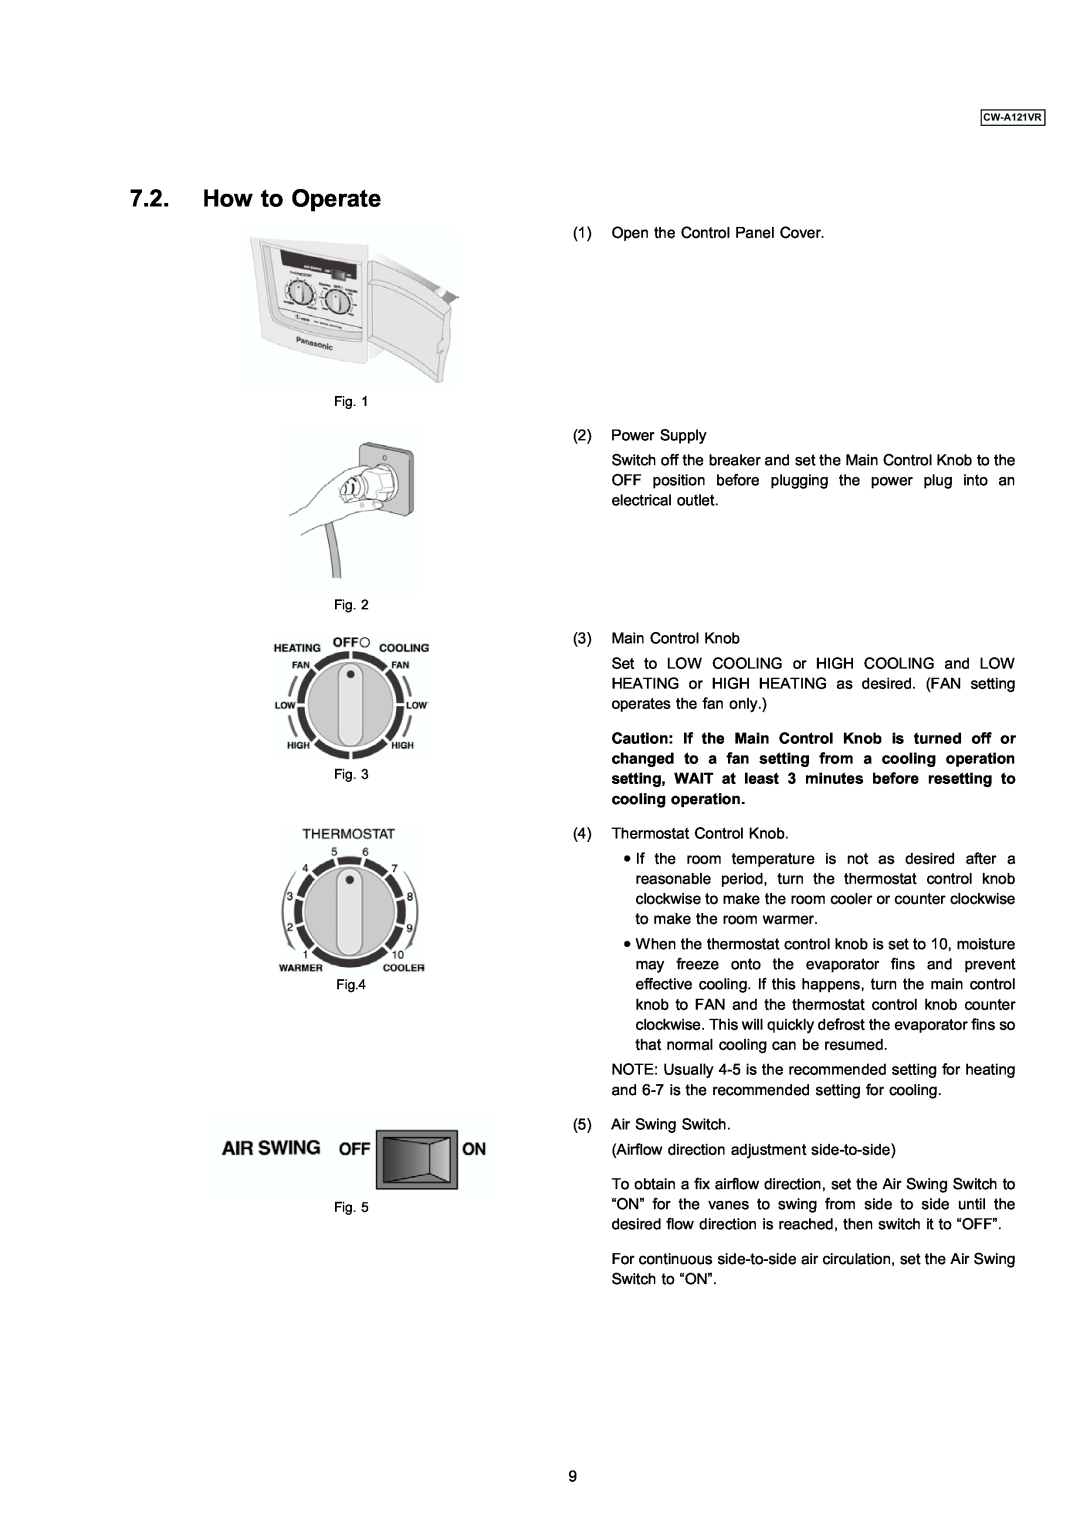 Panasonic CW-A121VR manual How to Operate 